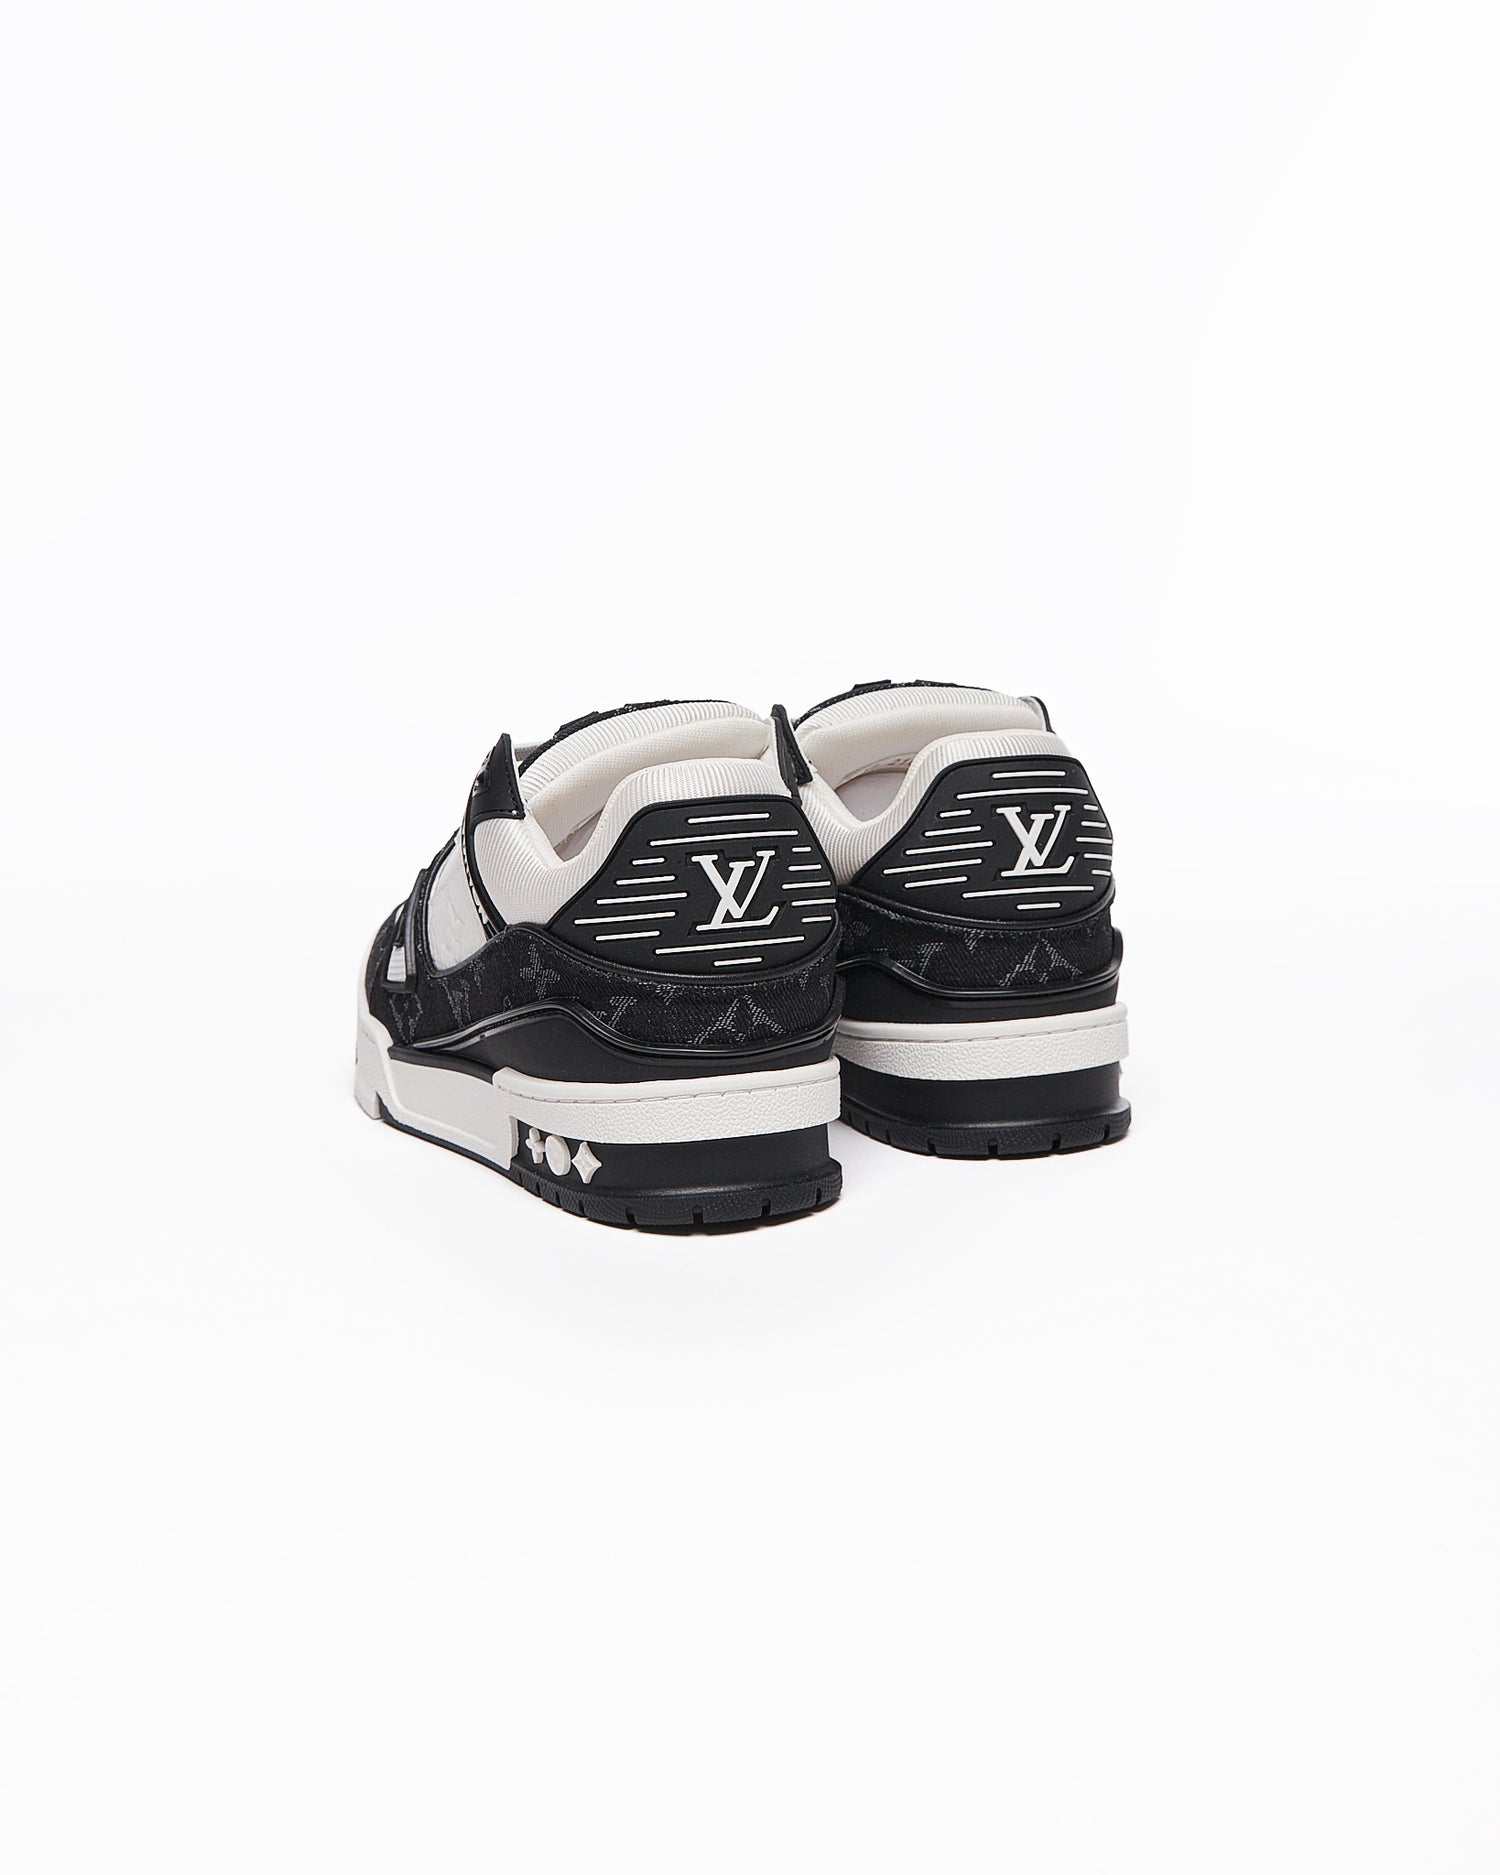 LV Trainer Shoes 165.90